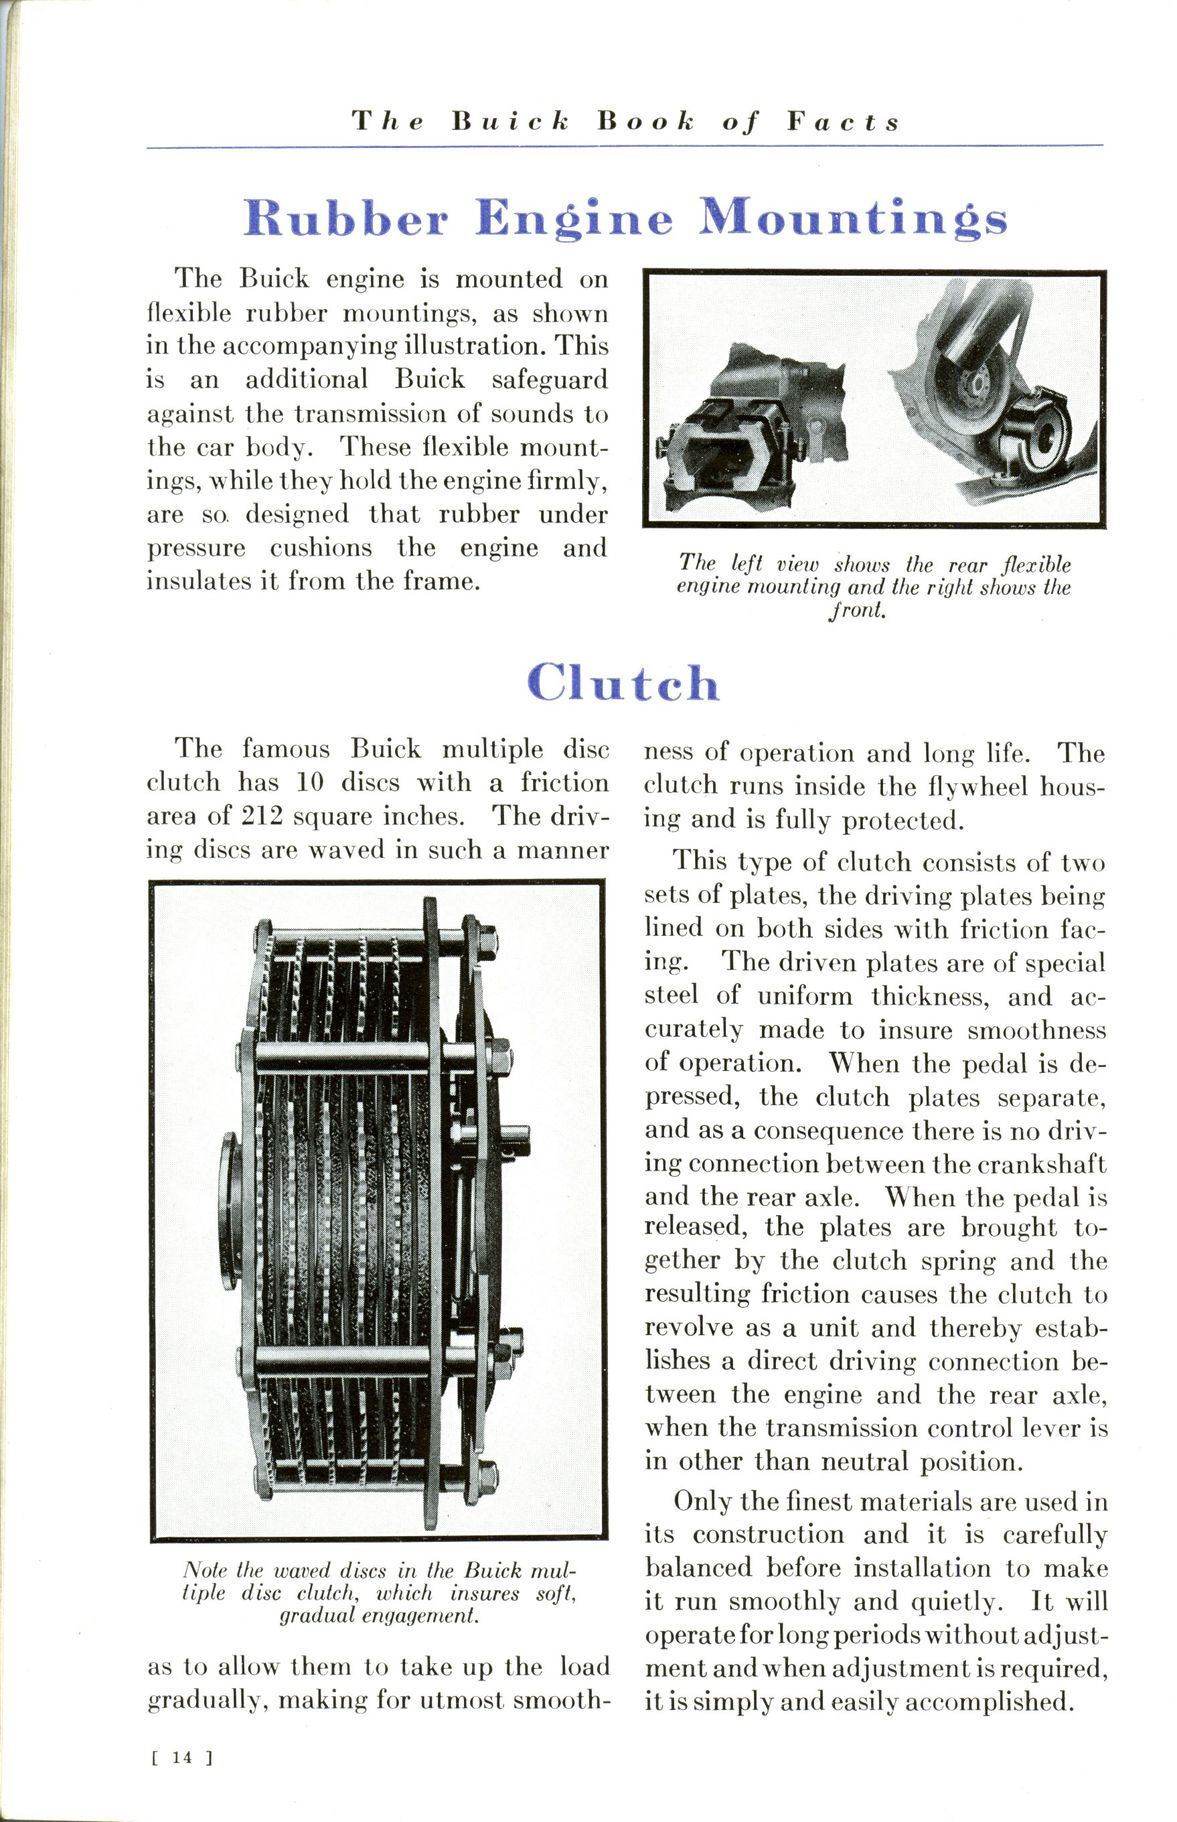 1930 Buick Book of Facts-14